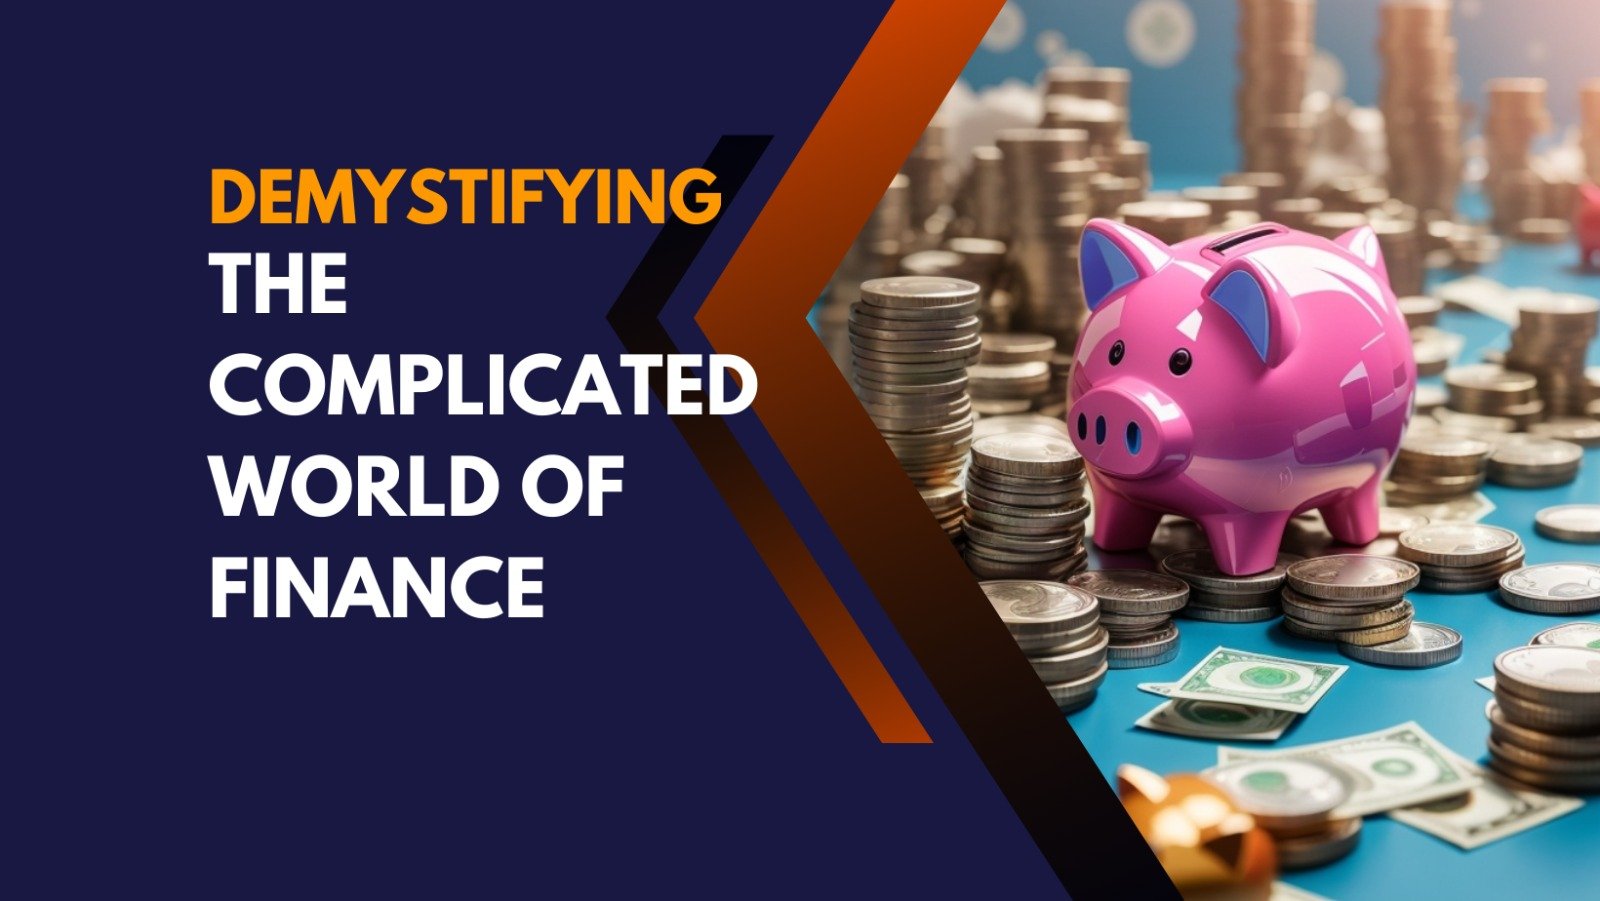 Demystifying the Complicated World of Finance